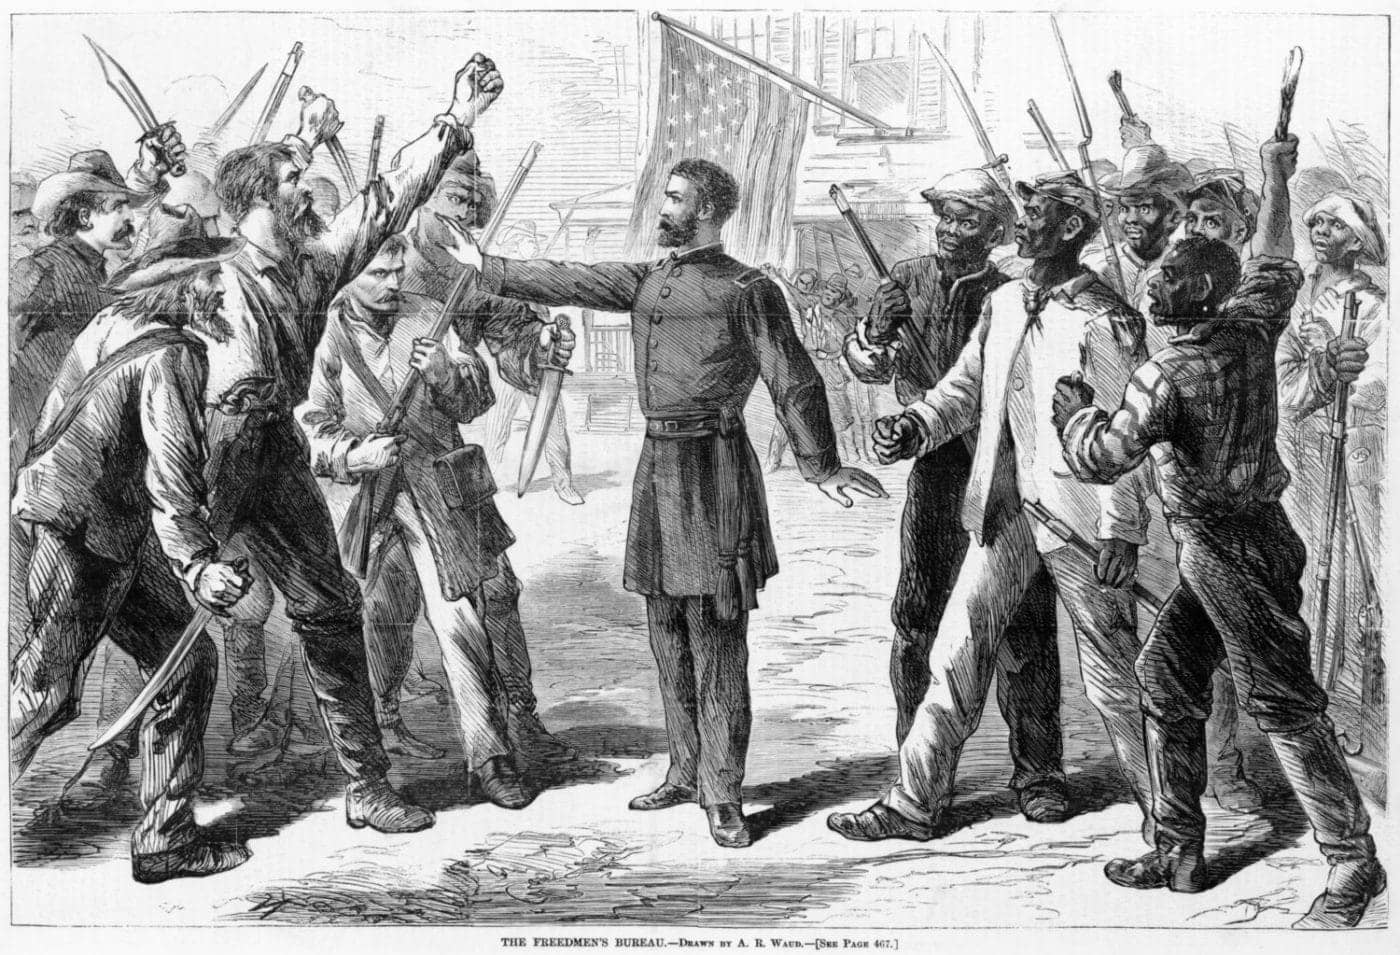 The-Freedmens-Bureau-Gen.-Shermans-40-acres-a-mule-separating-warring-whites-Blacks-art-by-Alfred-Waud-1868-Library-of-Congress-1400x955, A Black storyteller chronicles the history of slavery and freedom, Culture Currents 